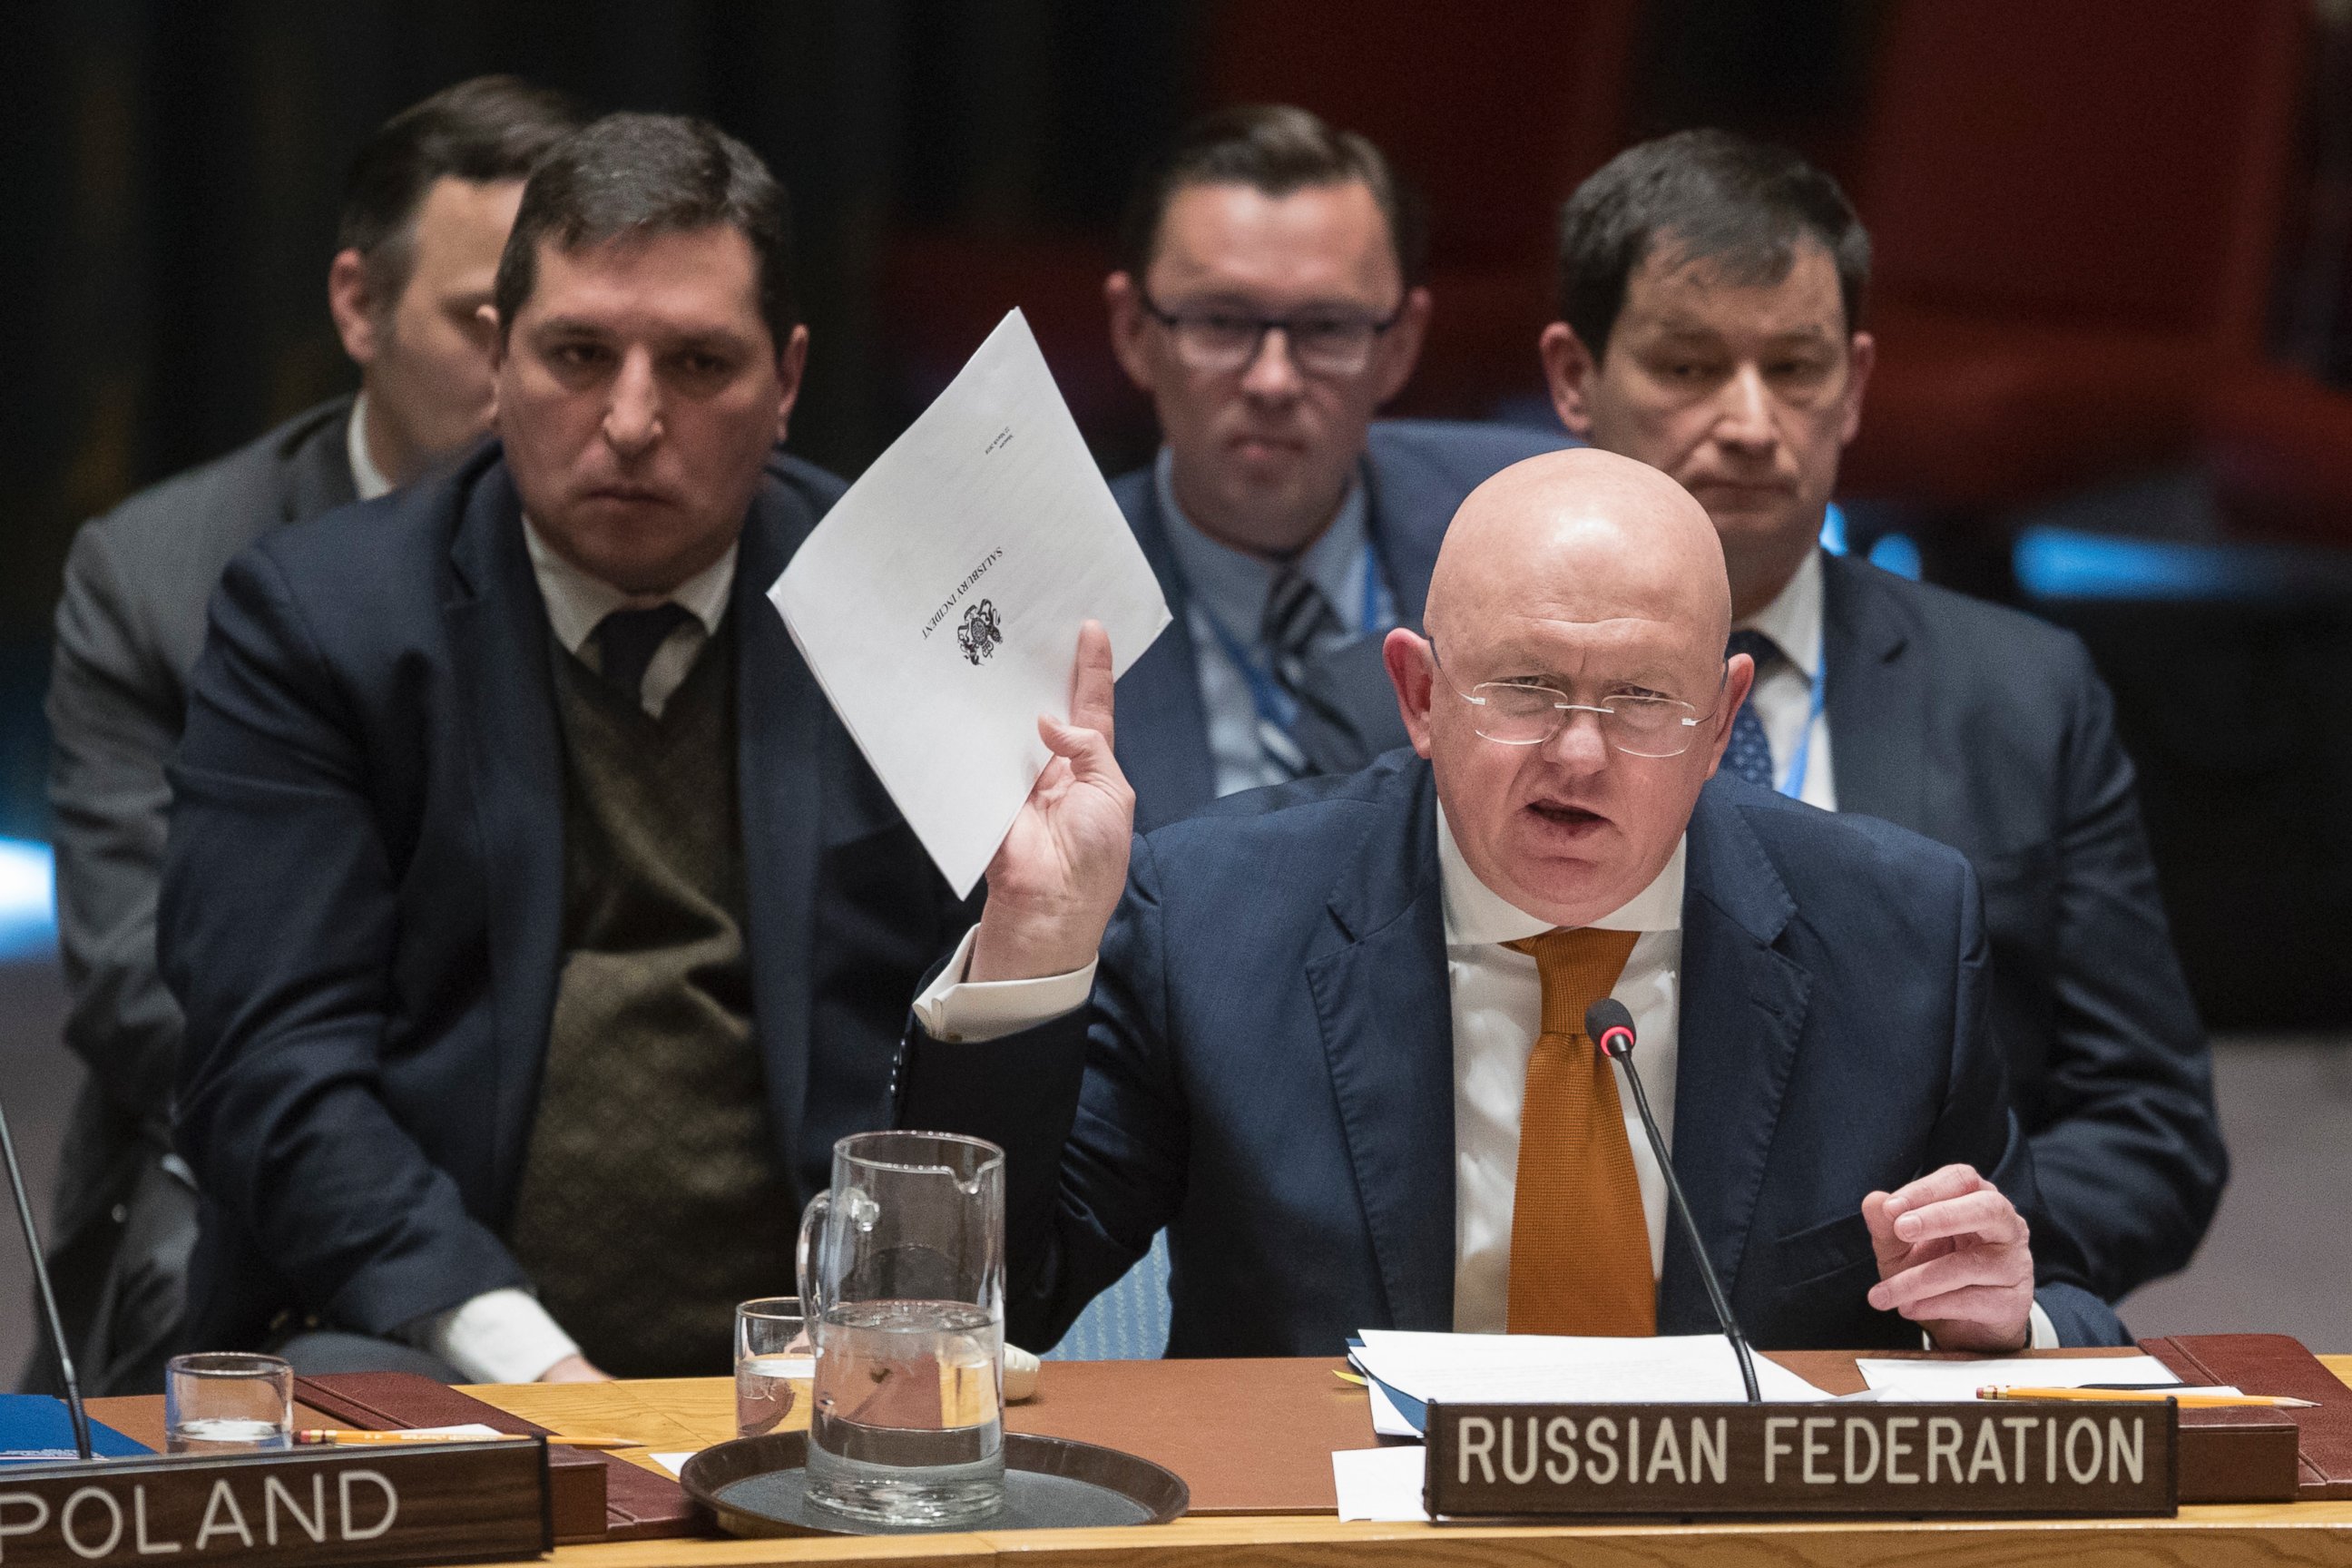 Russian Ambassador to the United Nations Vassily Nebenzia, seen here in a file photo from April 5, 2018 at United Nations headquarters, said no chemical weapons were used in Syria.